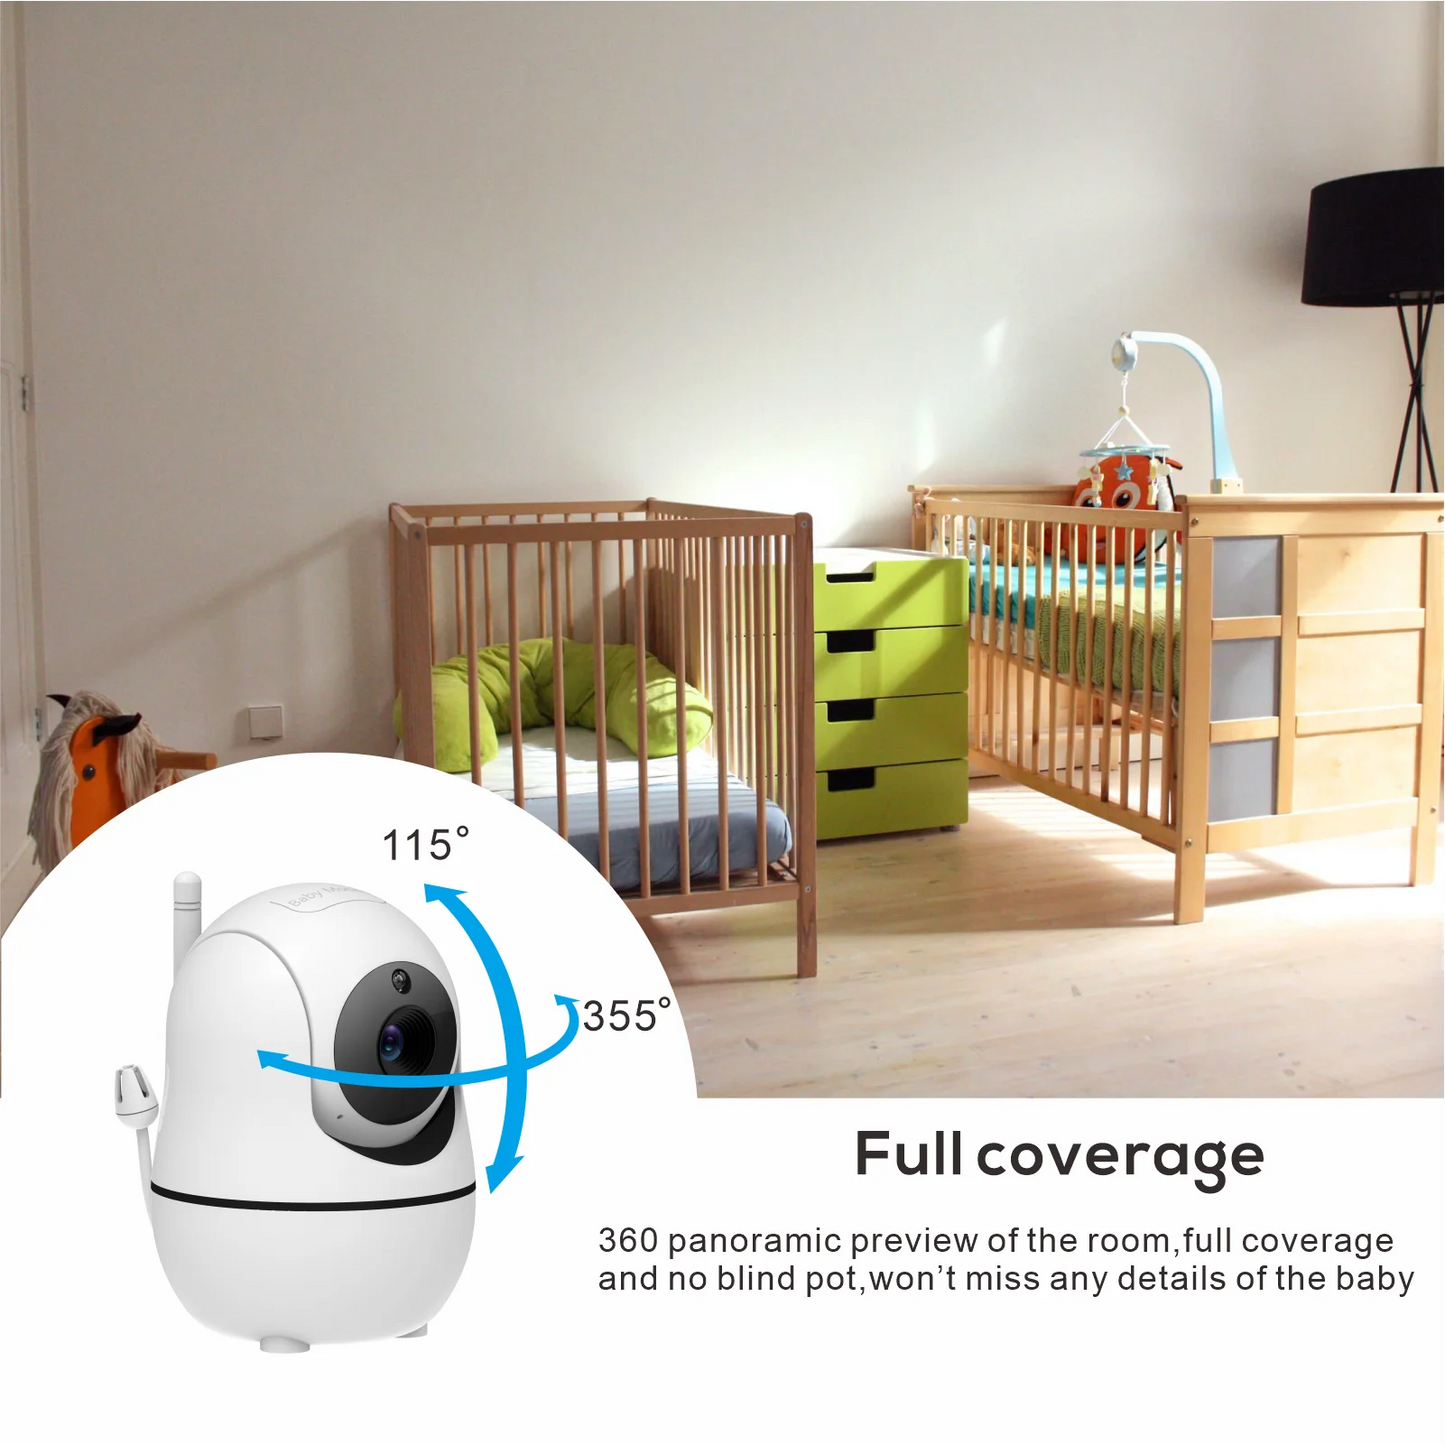 Baby monitor with wide range!